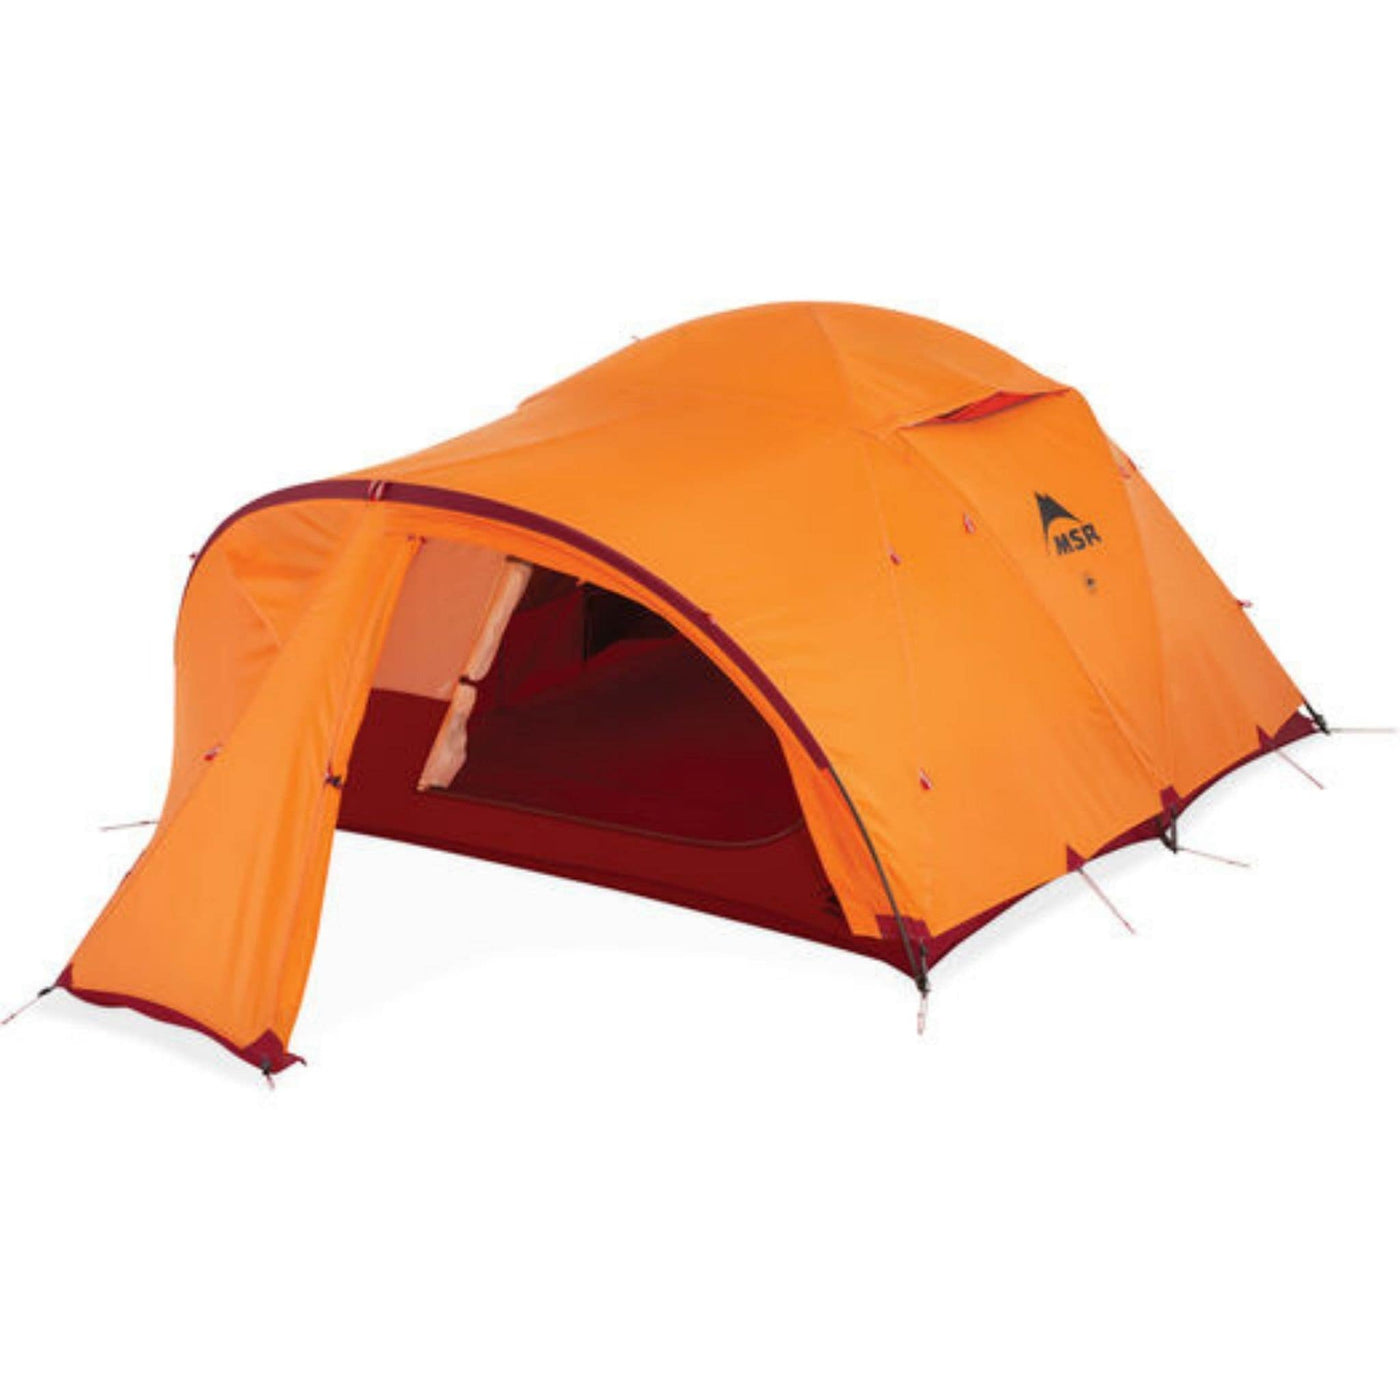 MSR Remote 3 Tent | 4 Season Mountaineering Tent NZ | Further Faster Christchurch NZ